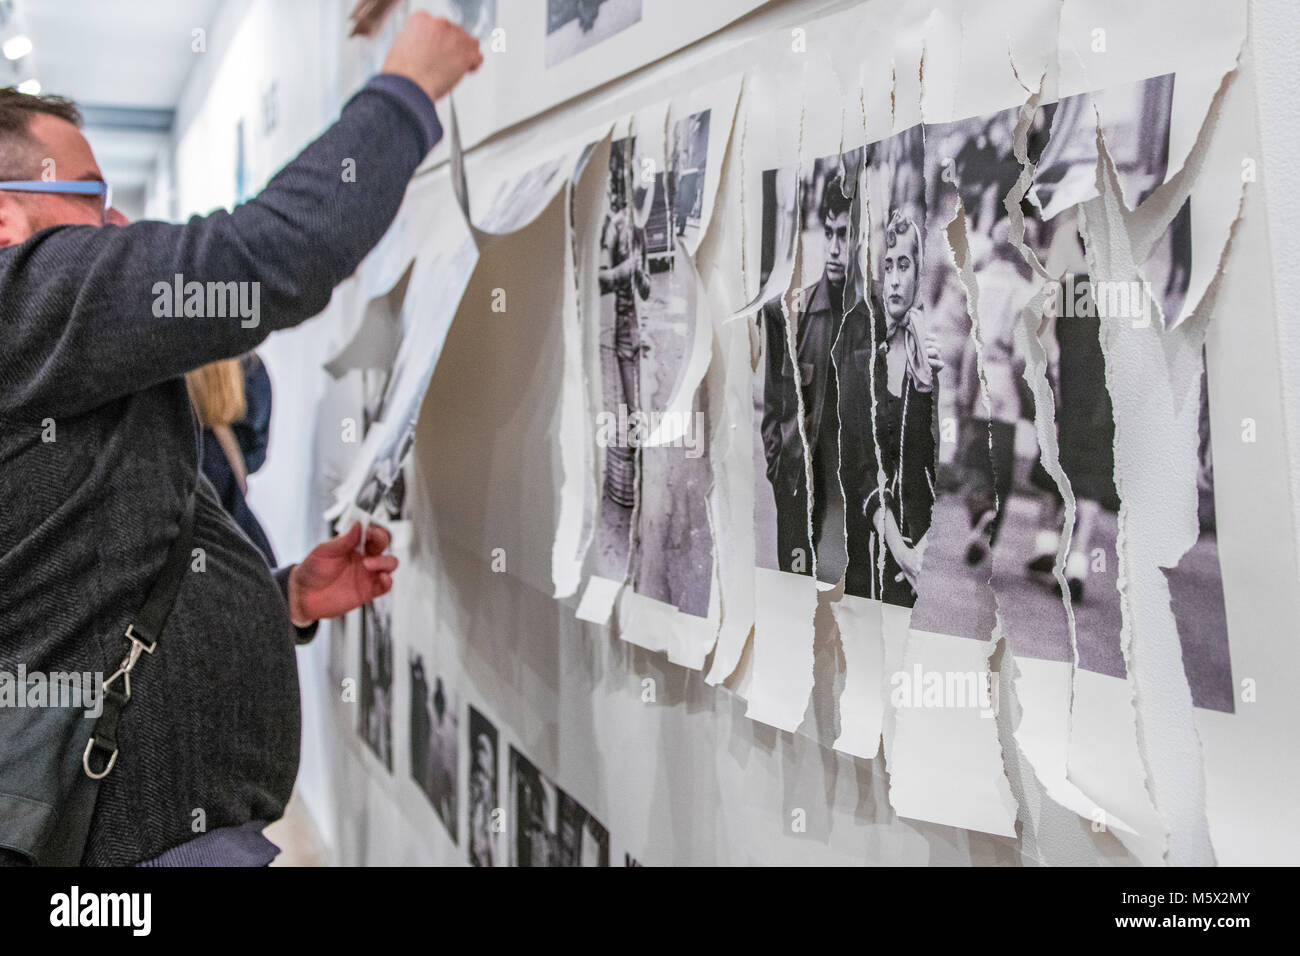 Portland, Oregon, USA. 26 FEB, 2018. The photographer Robert Frank's work from his ground breaking book "The Americans" hangs  defaced as a gallery goer shreds it at Blue Sky Gallery in Portland, Oregon, USA. The work was destroyed in a “Destruction Dance” performance defacing the photographs with ink and mutilation with scissors, knives and even ice skates  at the end of it’s run. The destruction was Frank's protest regarding today's greed in the global art market. Credit: Ken Hawkins/Alamy Live News Stock Photo